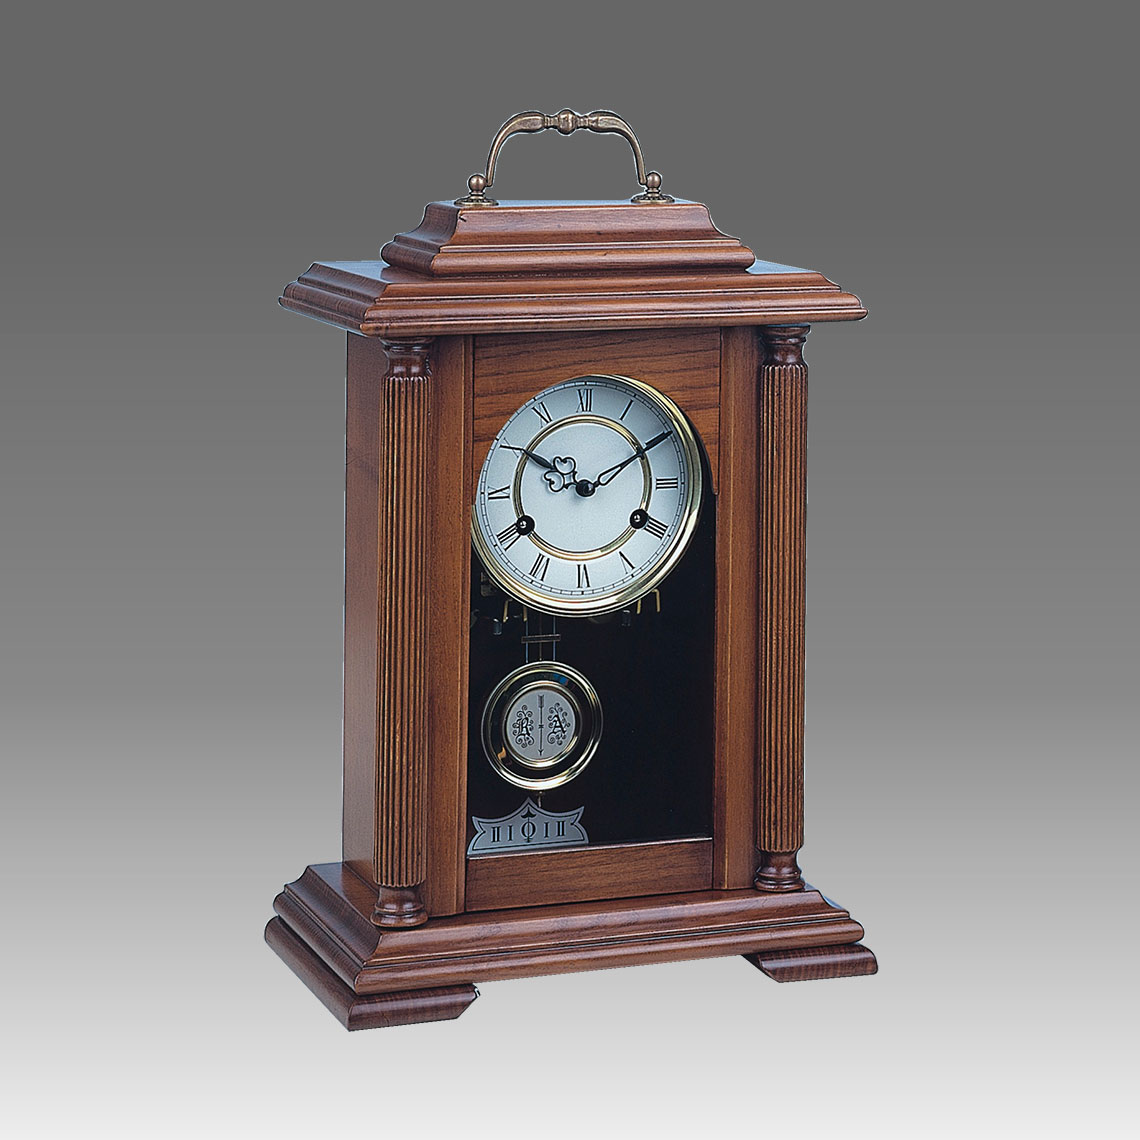 Mante Clock, Table Clock, Cimn Clock, Art.328/1 walnut - Bim Bam melody on coil gong, White dial with roman number serigrafy